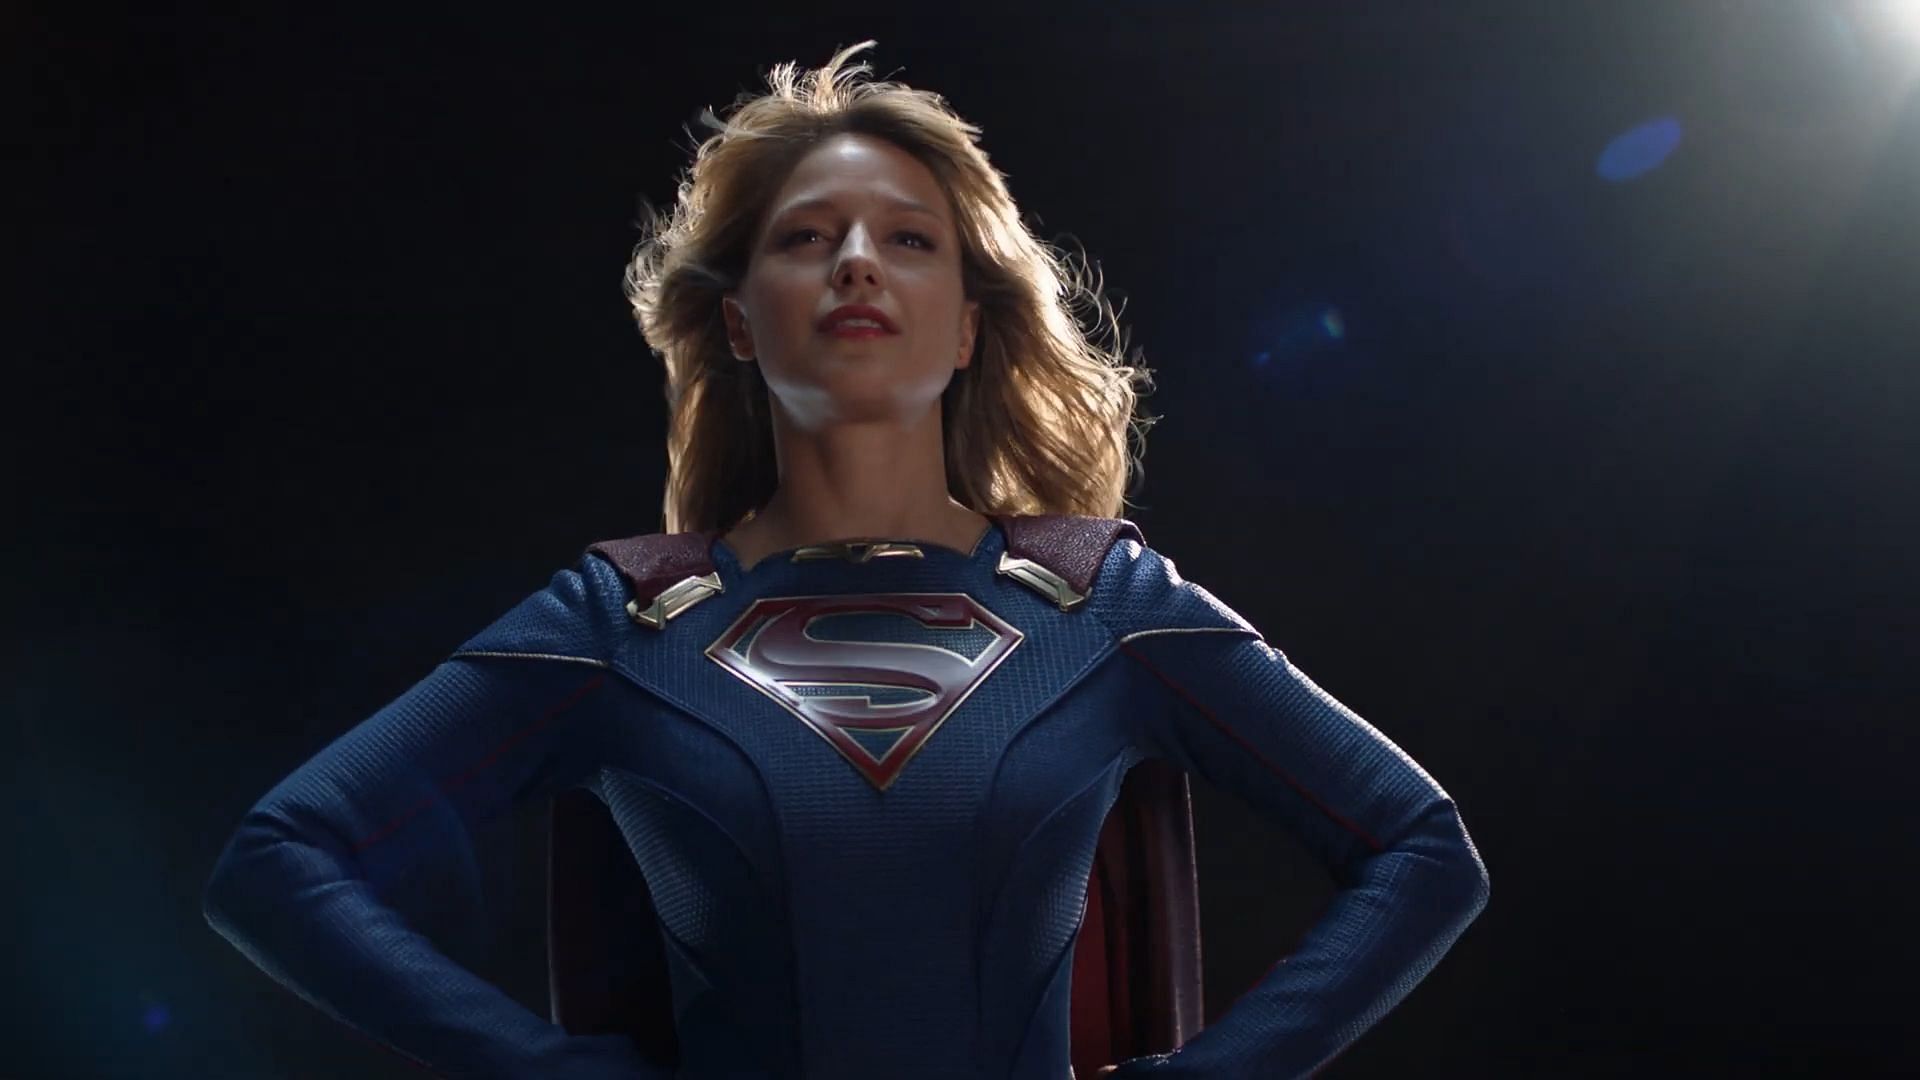 Melissa Benoist plays Kara Danvers in this long-running show that has been criticized for its overt political messaging and lack of engaging storylines (Image via CW)